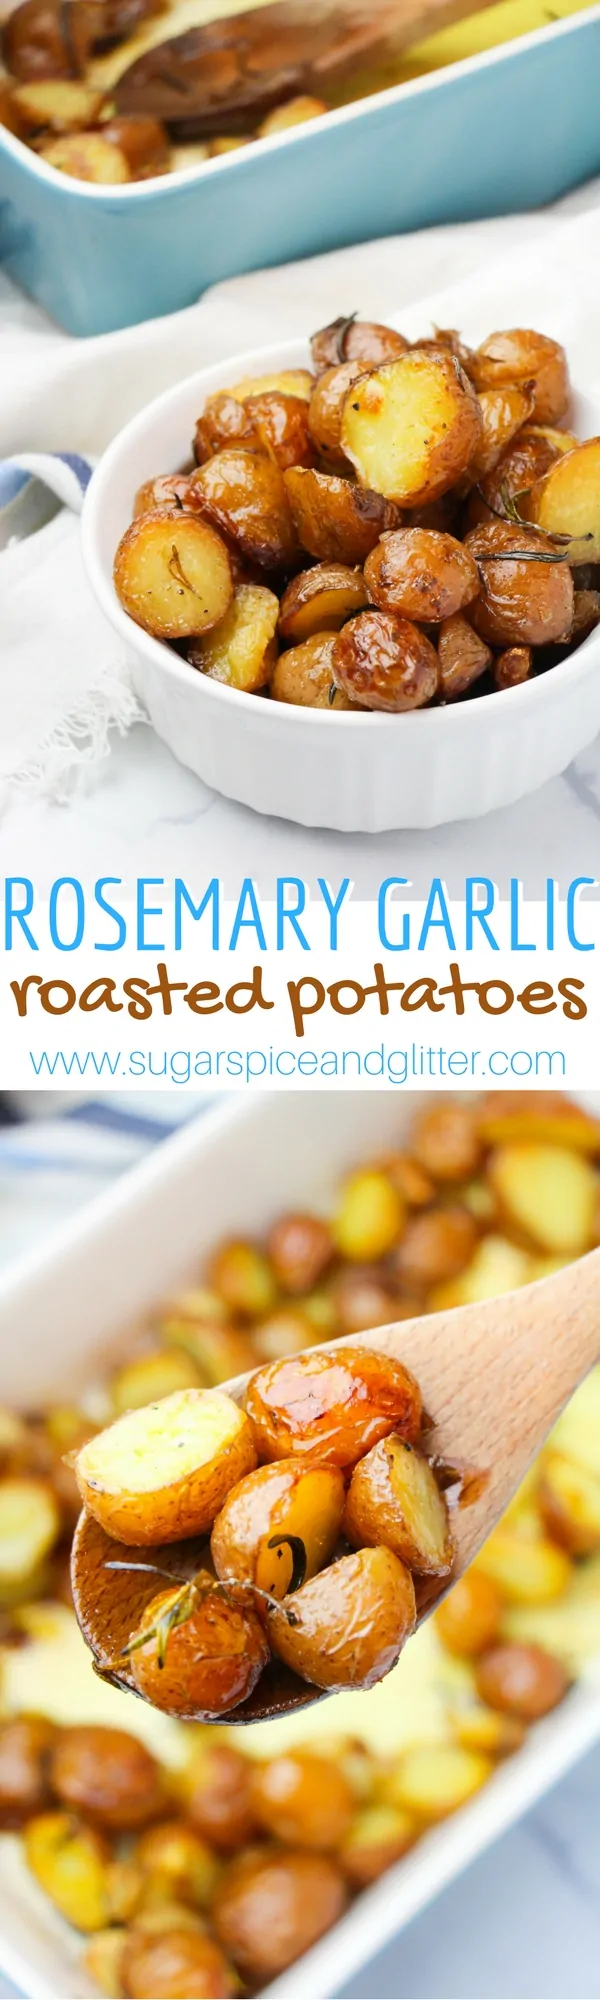 A delicious and easy roasted potato side dish, these Rosemary Garlic Roasted Potatoes are one of our families favorite ways to enjoy the king of all root vegetables